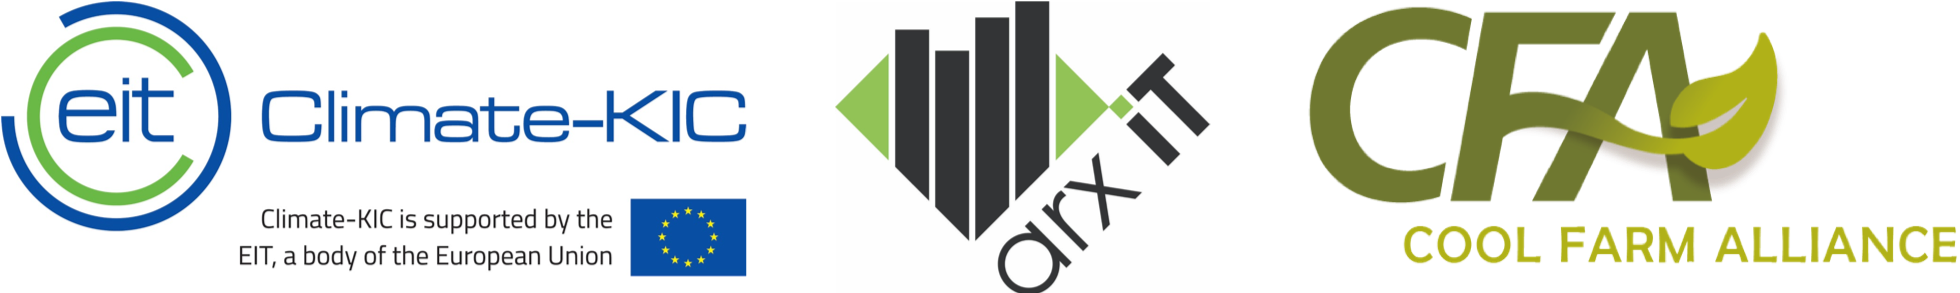 logos for EIT Climate-KIC, arx iT﻿, and Cool Farm Alliance